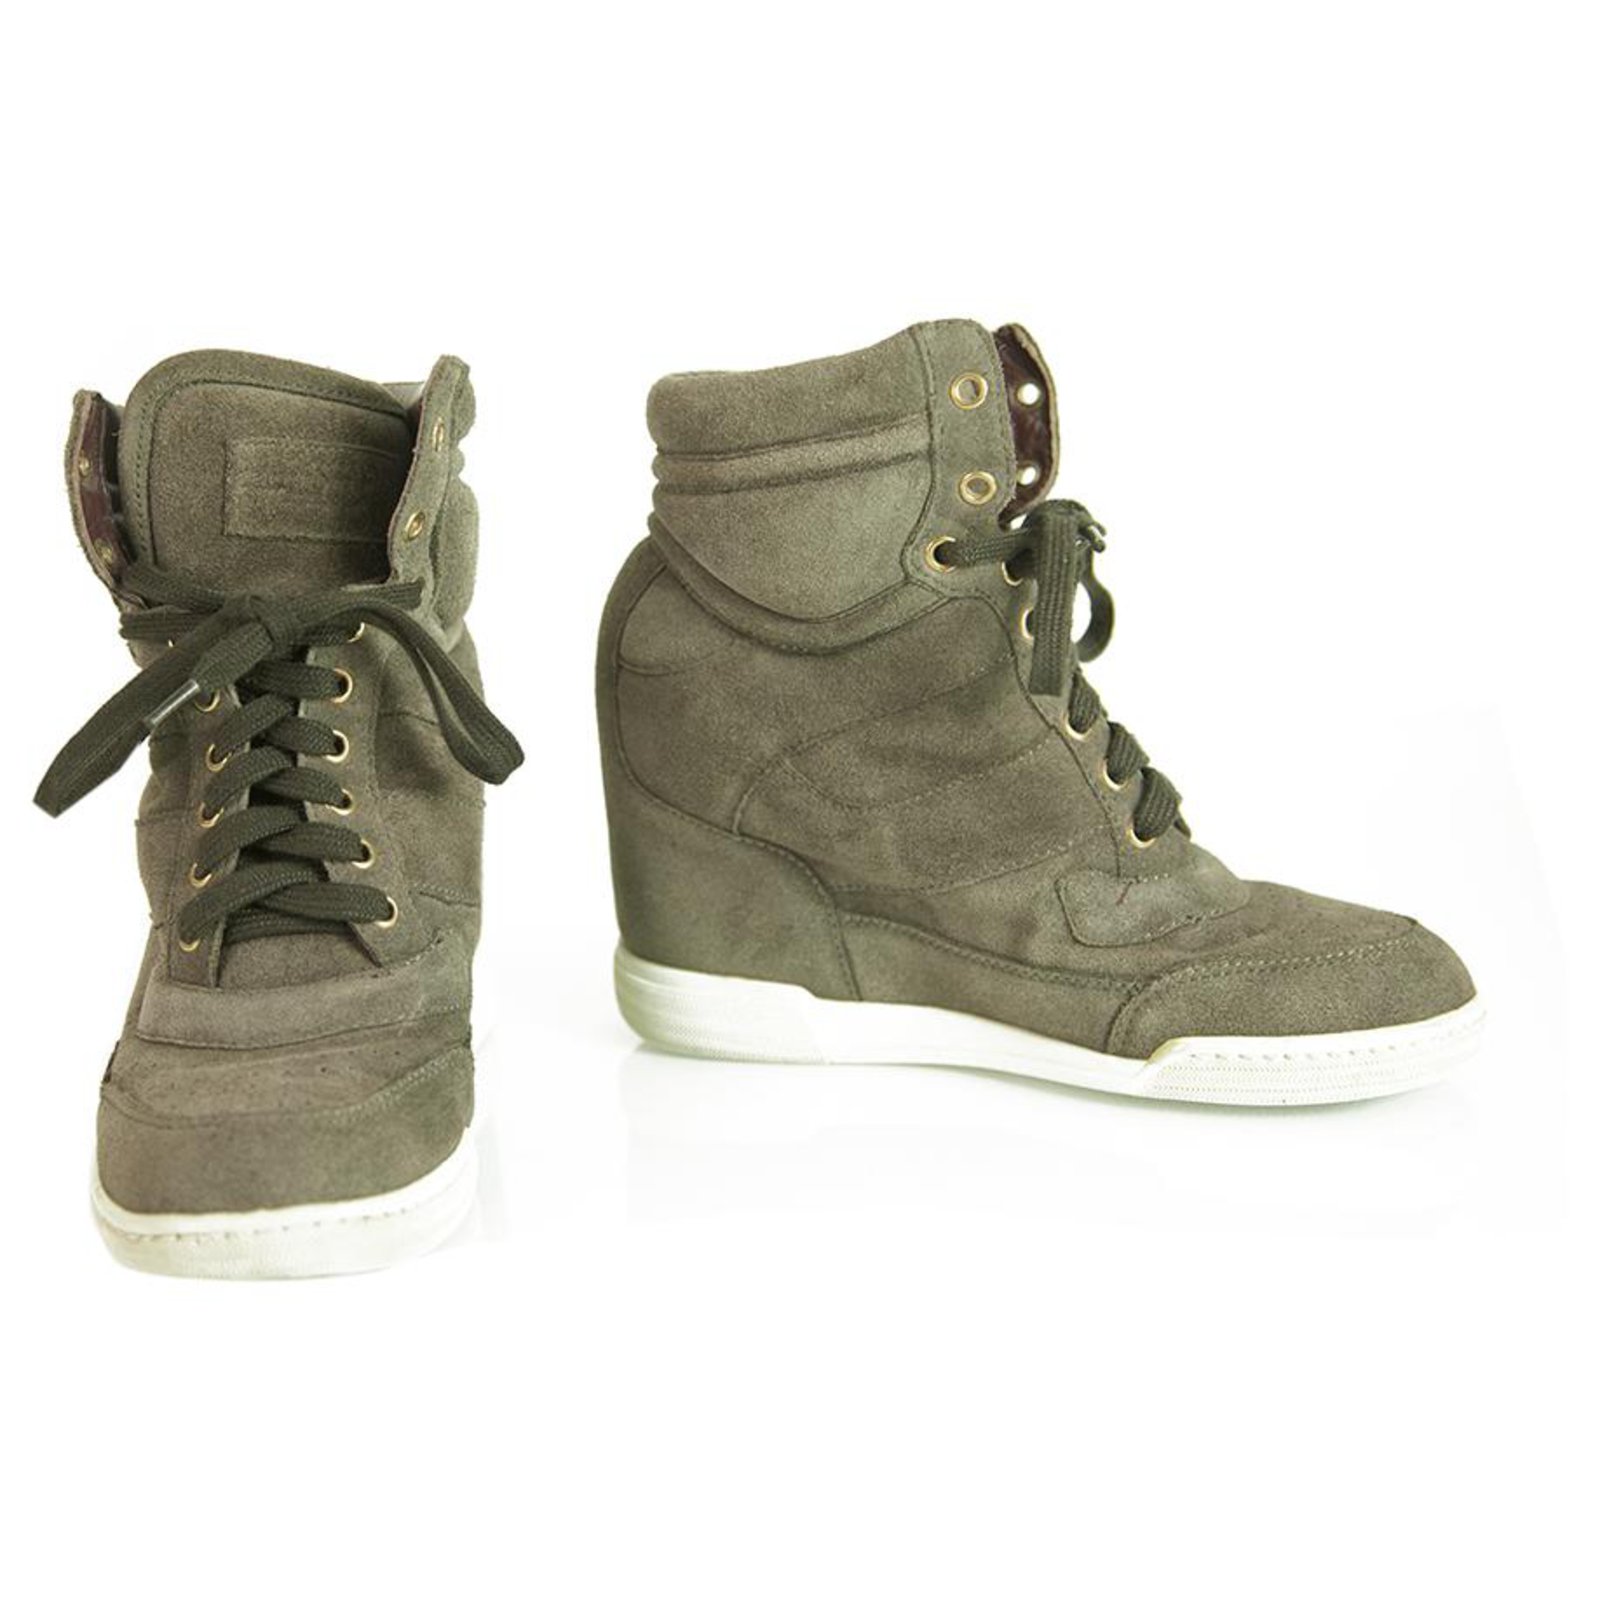 Marc by Jacobs Jacobs Gray Suede High Top Sneakers Trainers Shoes 37 Dark ref.262231 - Joli Closet